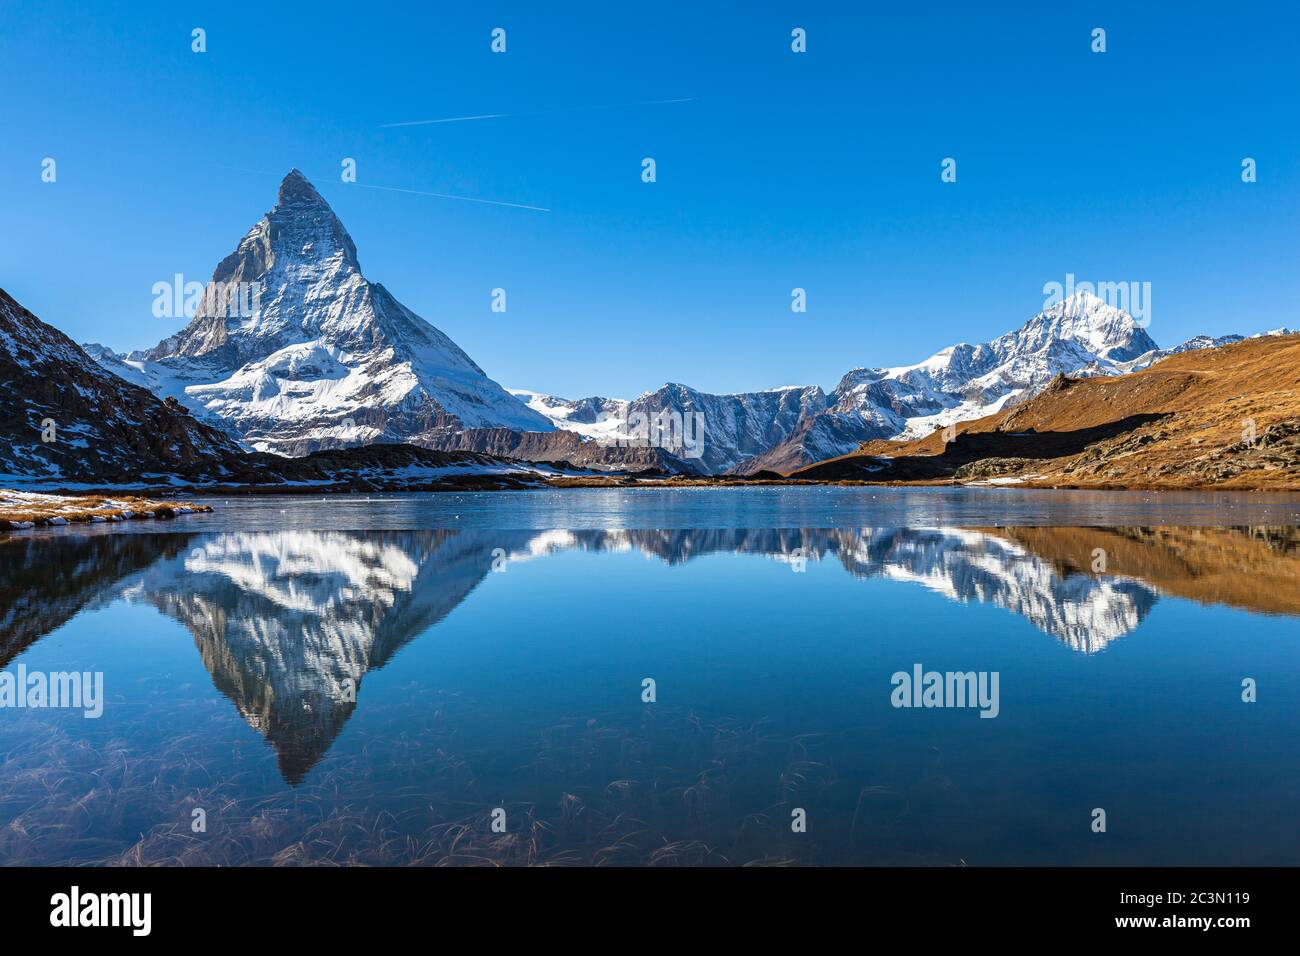 Stunning panorama view of the famous Matterhorn and Weisshorn peak of Swiss Pennine Alps with beautiful reflection in Riffelsee lake on sunny autumn n Stock Photo